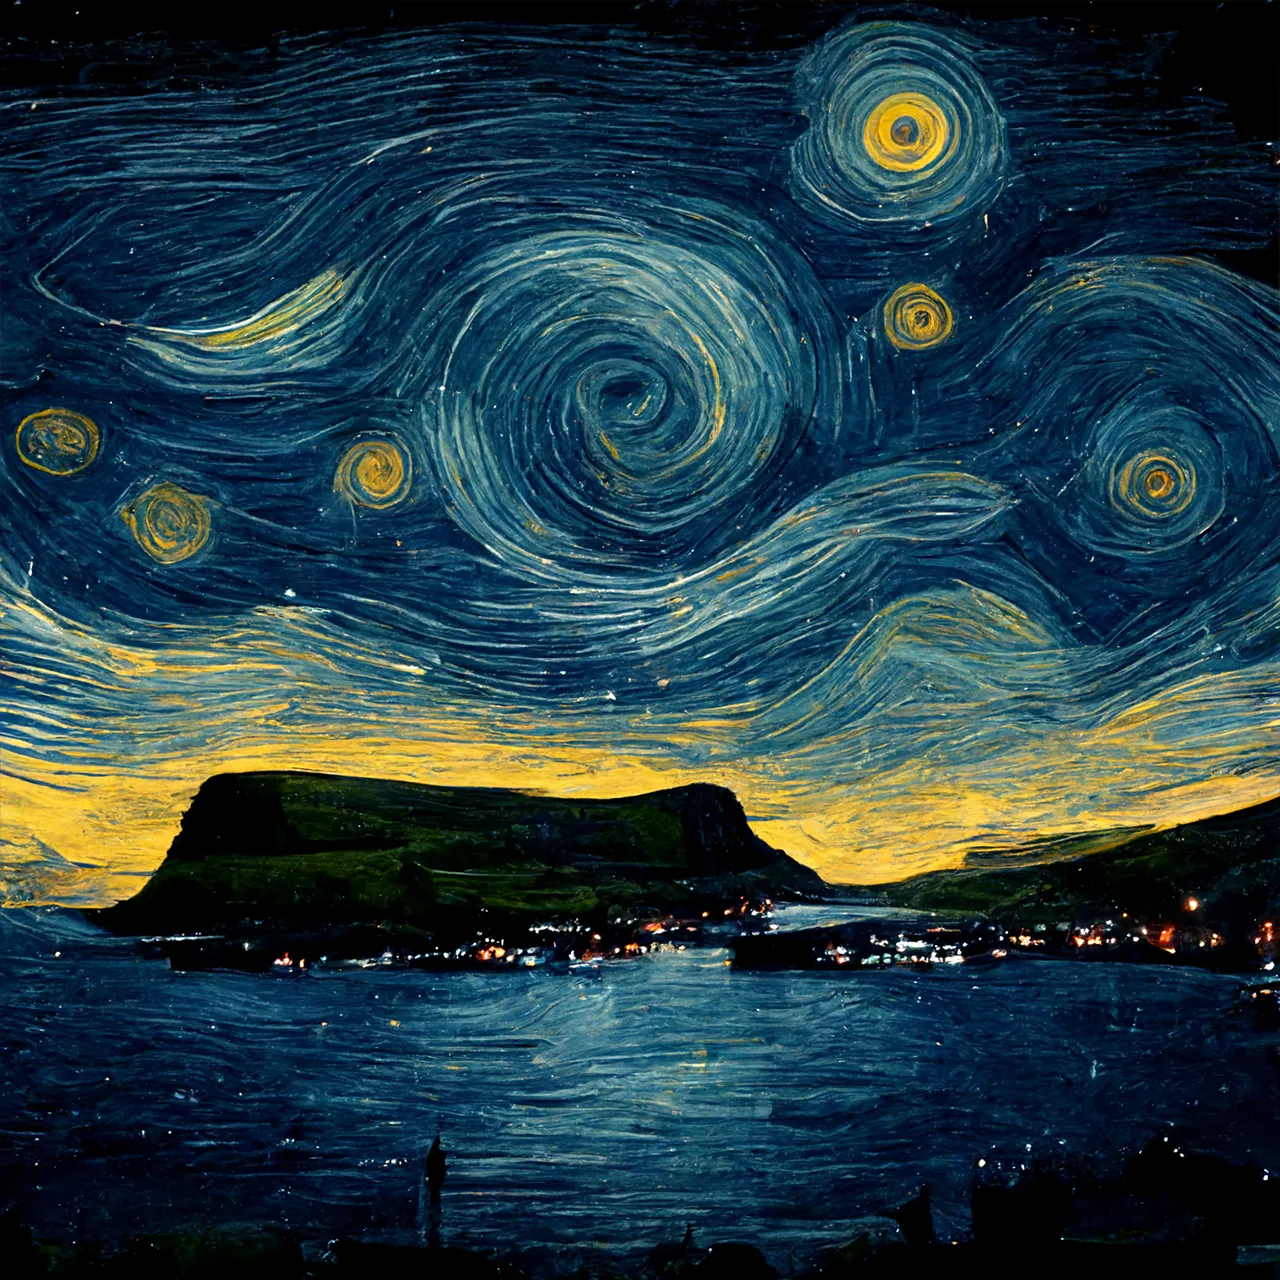 How Would van Gogh Have Painted the Faroe Islands?